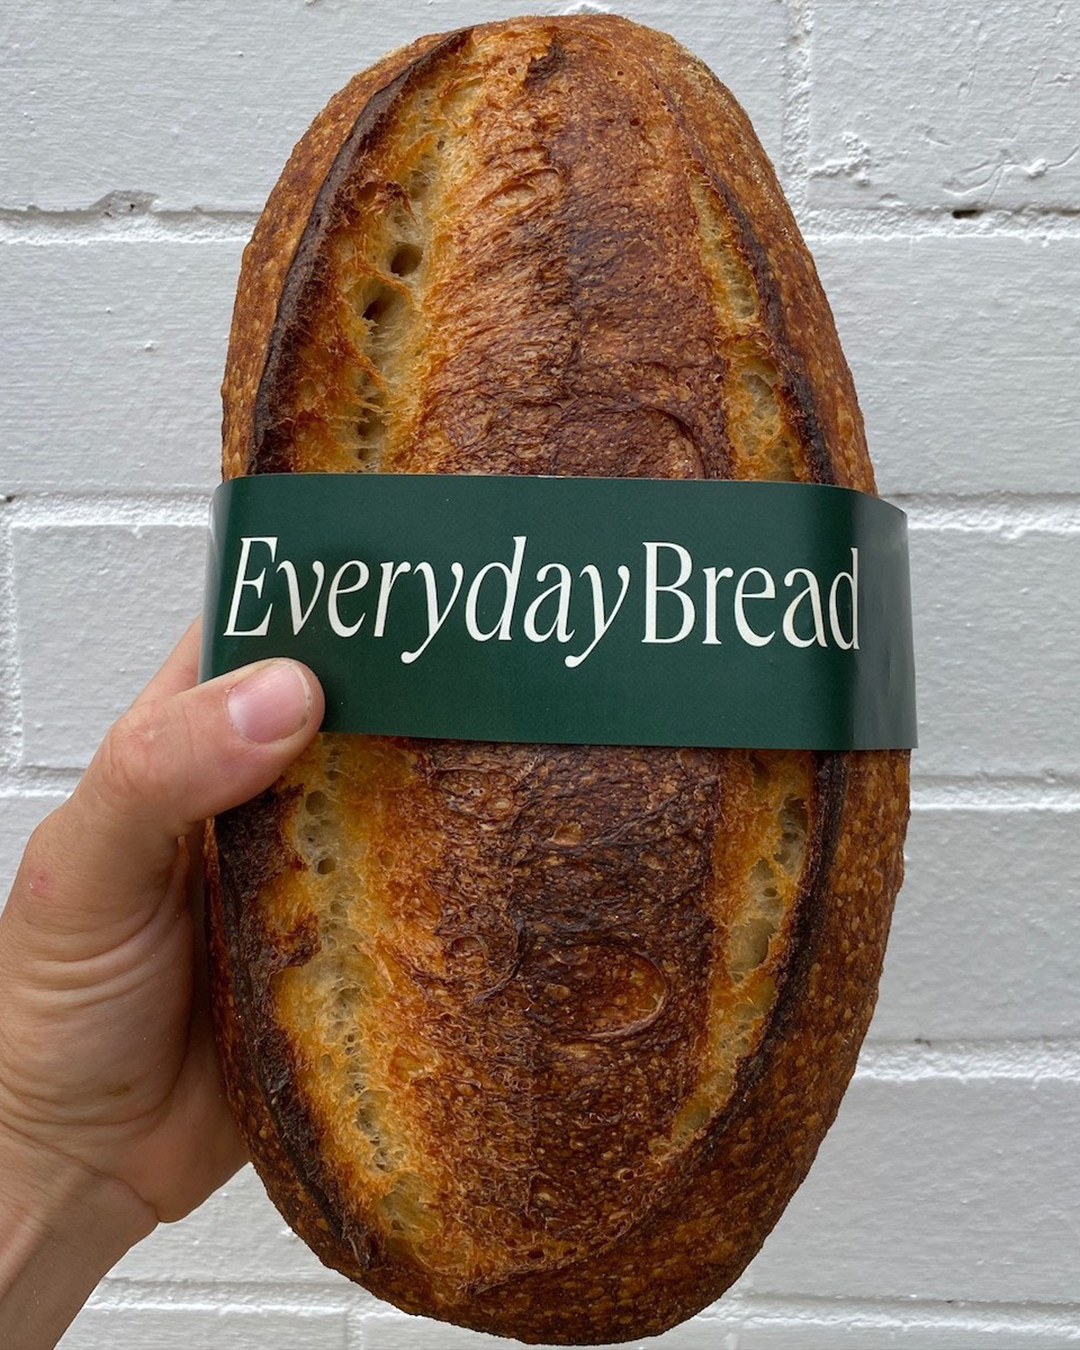 A loaf of bread from Everyday Bread bakery